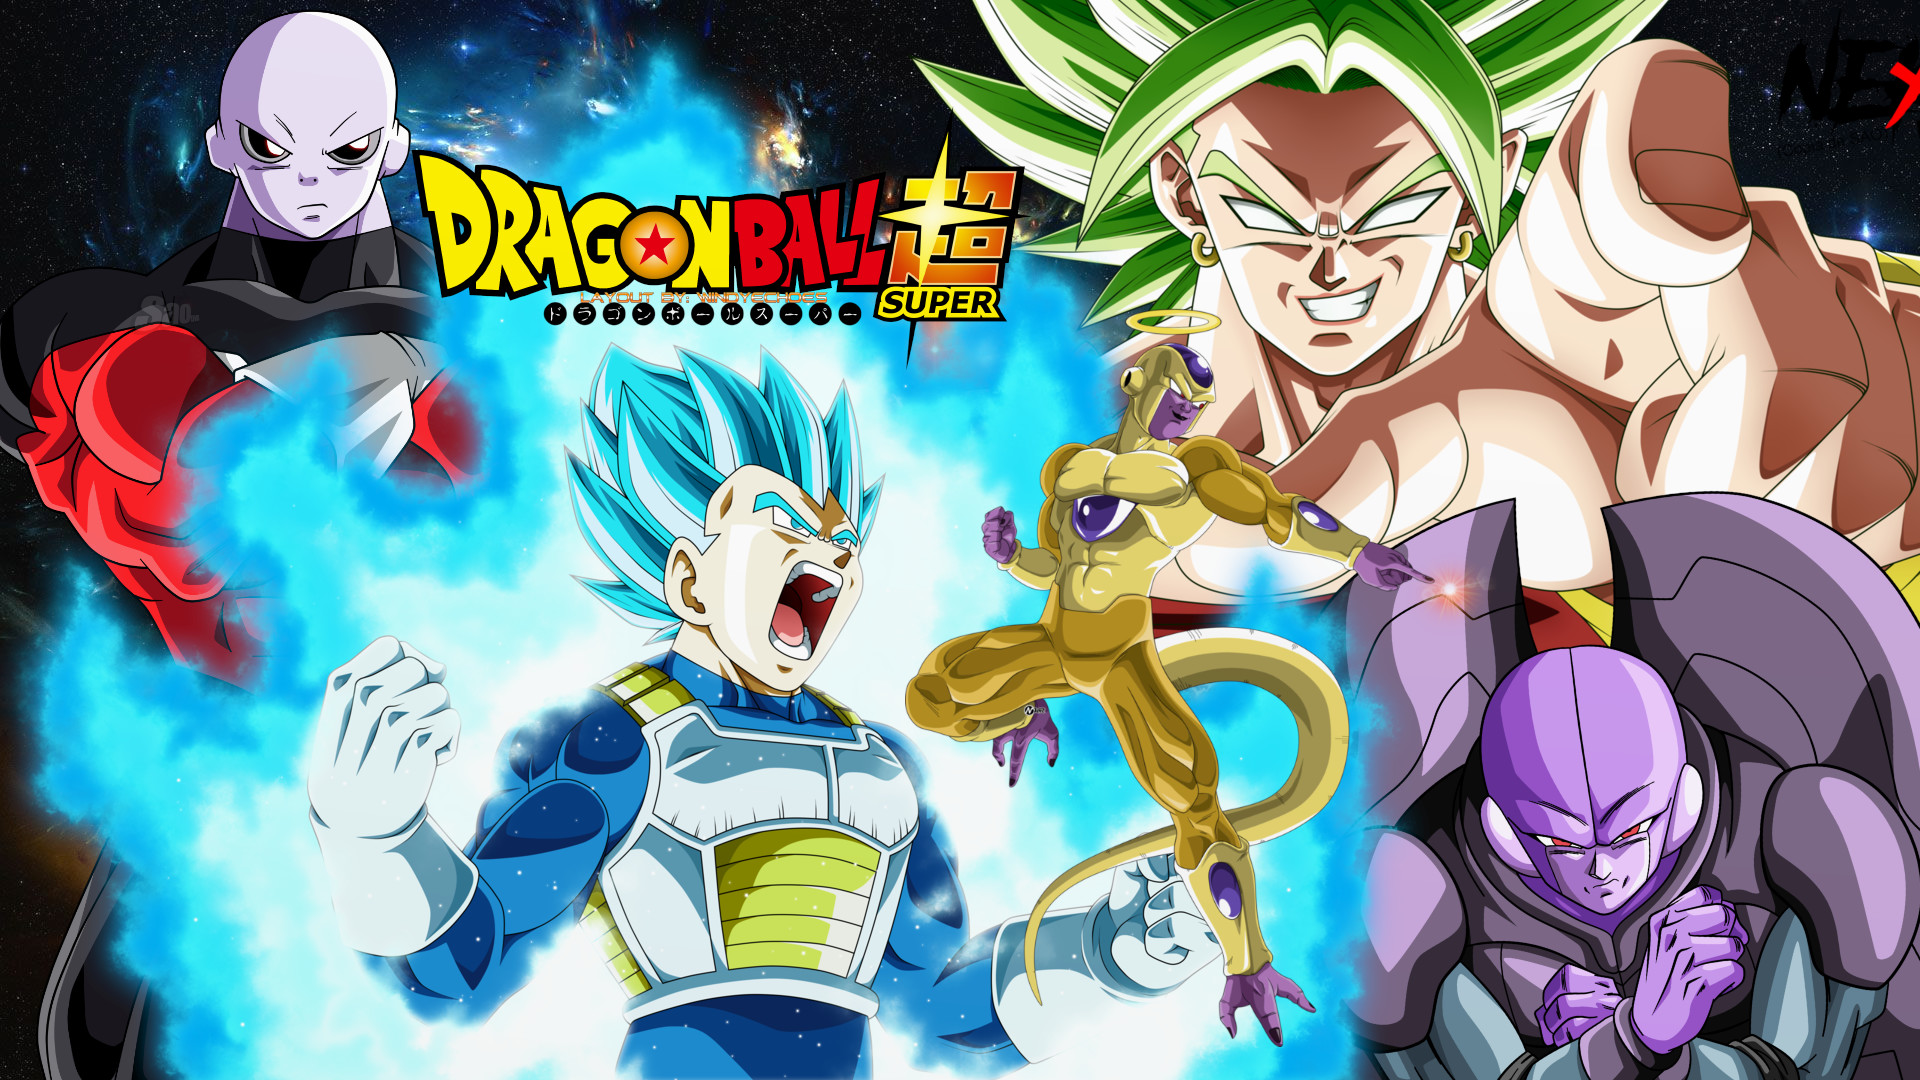 Goku And Vegeta Team Up In The Final Trailer For Dragon Ball Super Broly